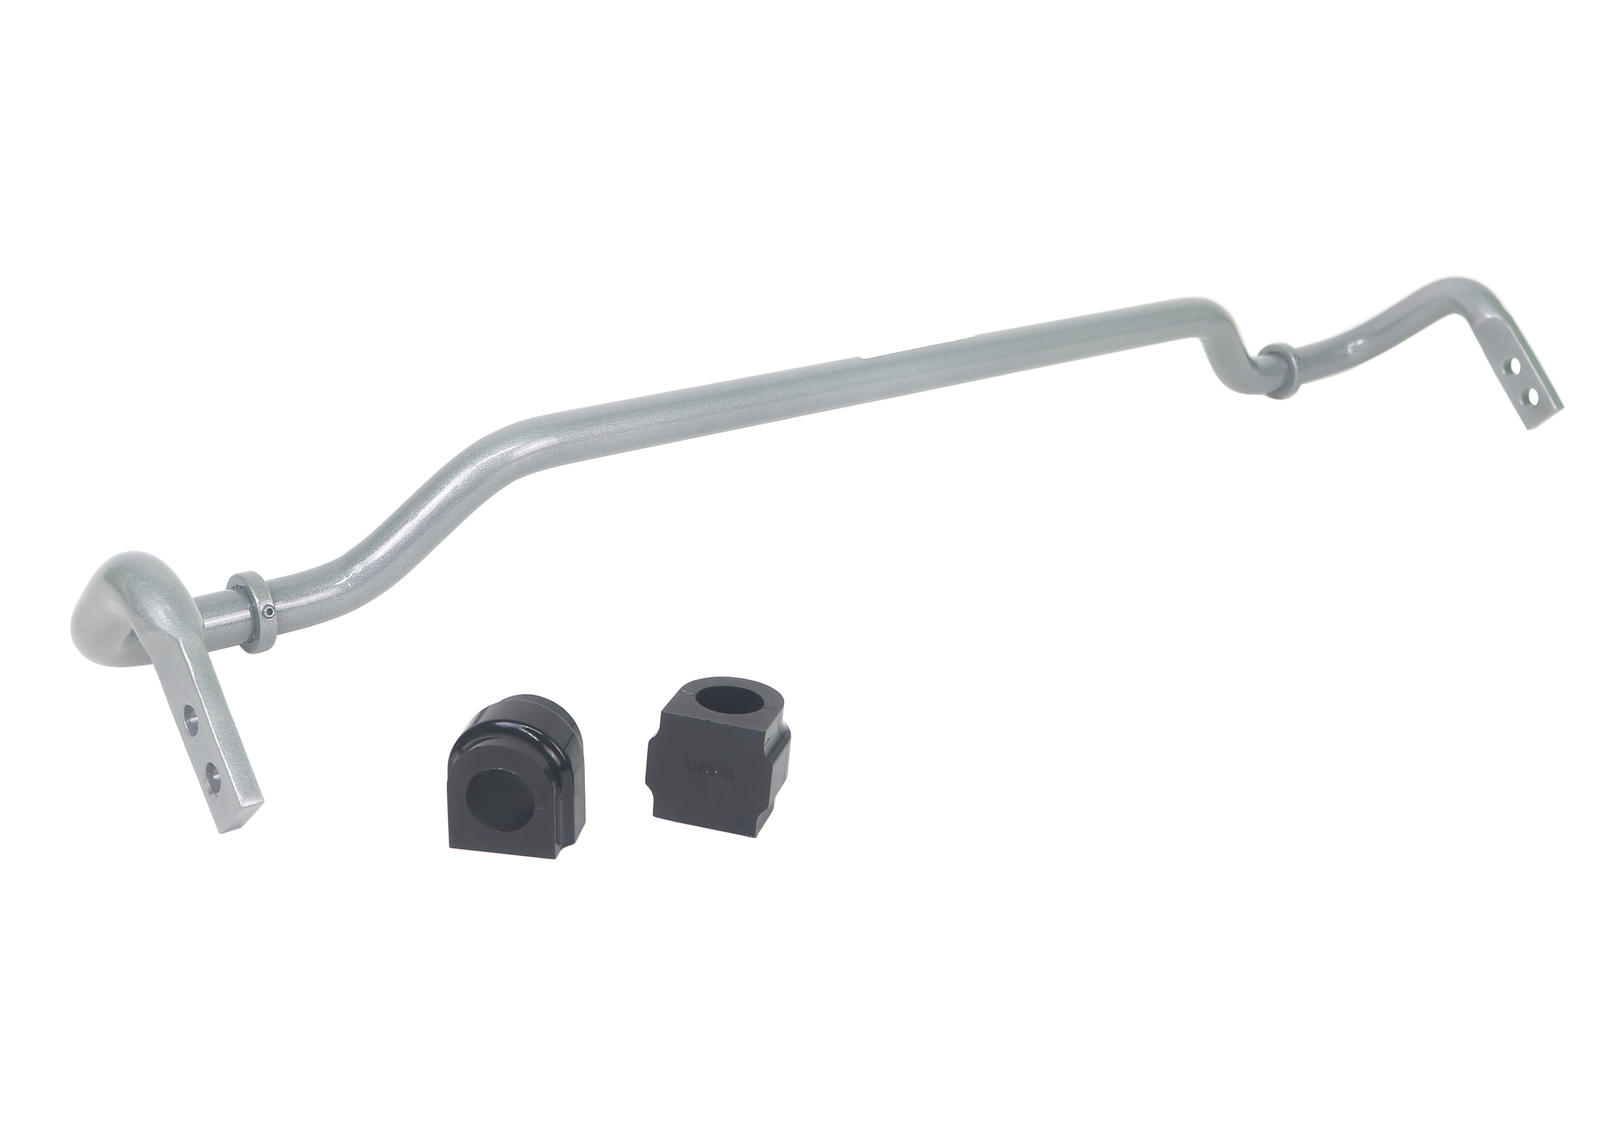 Rear Sway Bar - 22mm 2 Point Adjustable to Suit Audi, Seat, Skoda and Volkswagen MQB Fwd